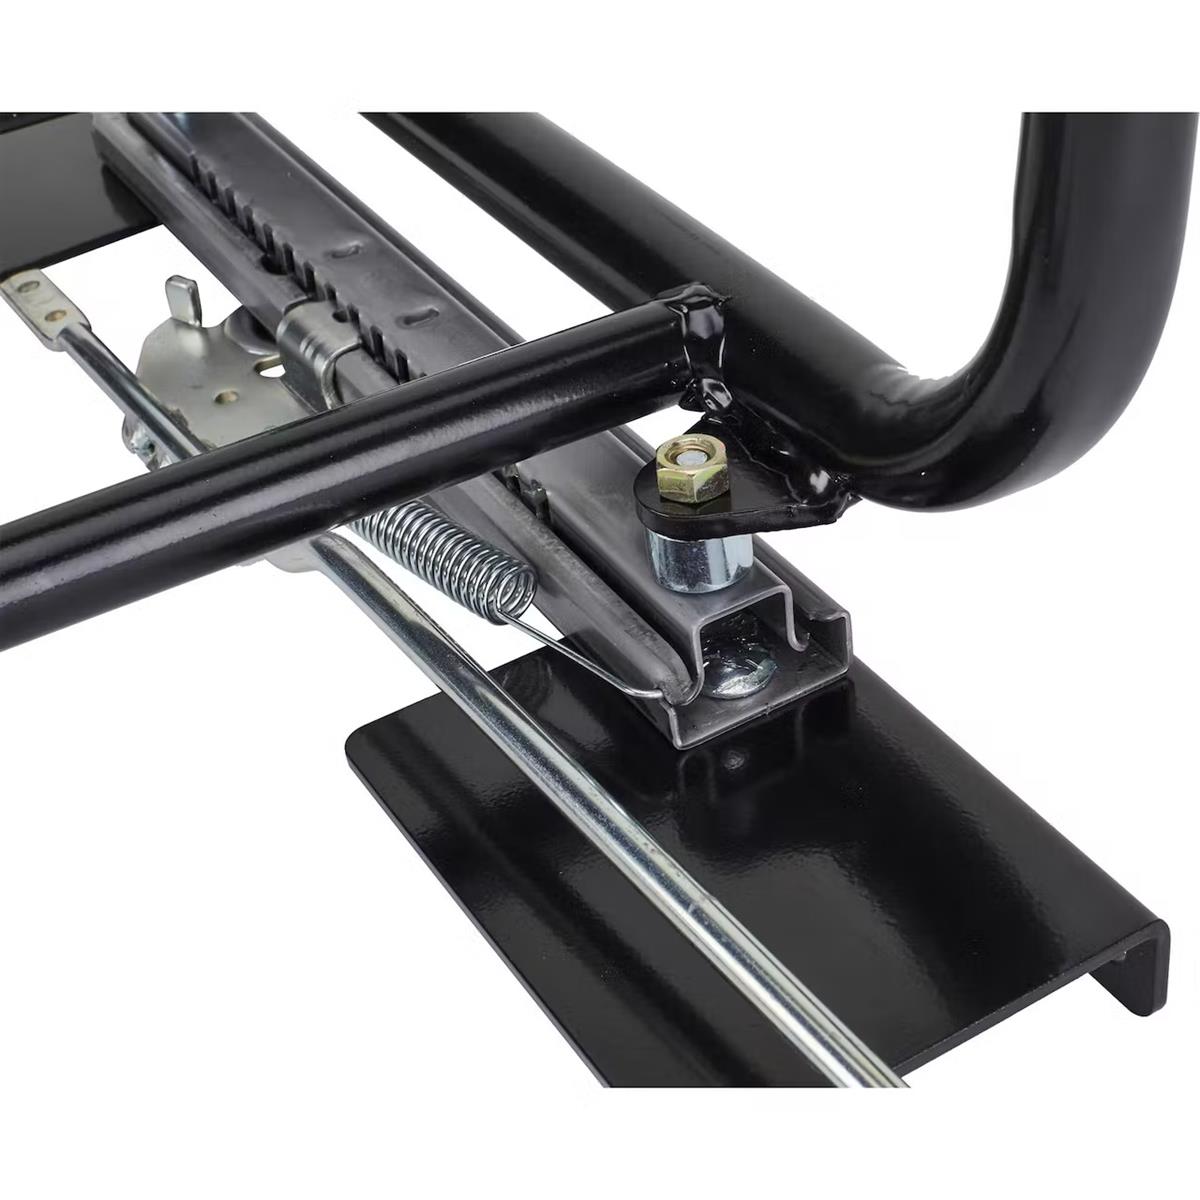 COM-5753 | COM-5753 Universal Seat Mounting Frame with Slider and Mounts Common Application9.jpg